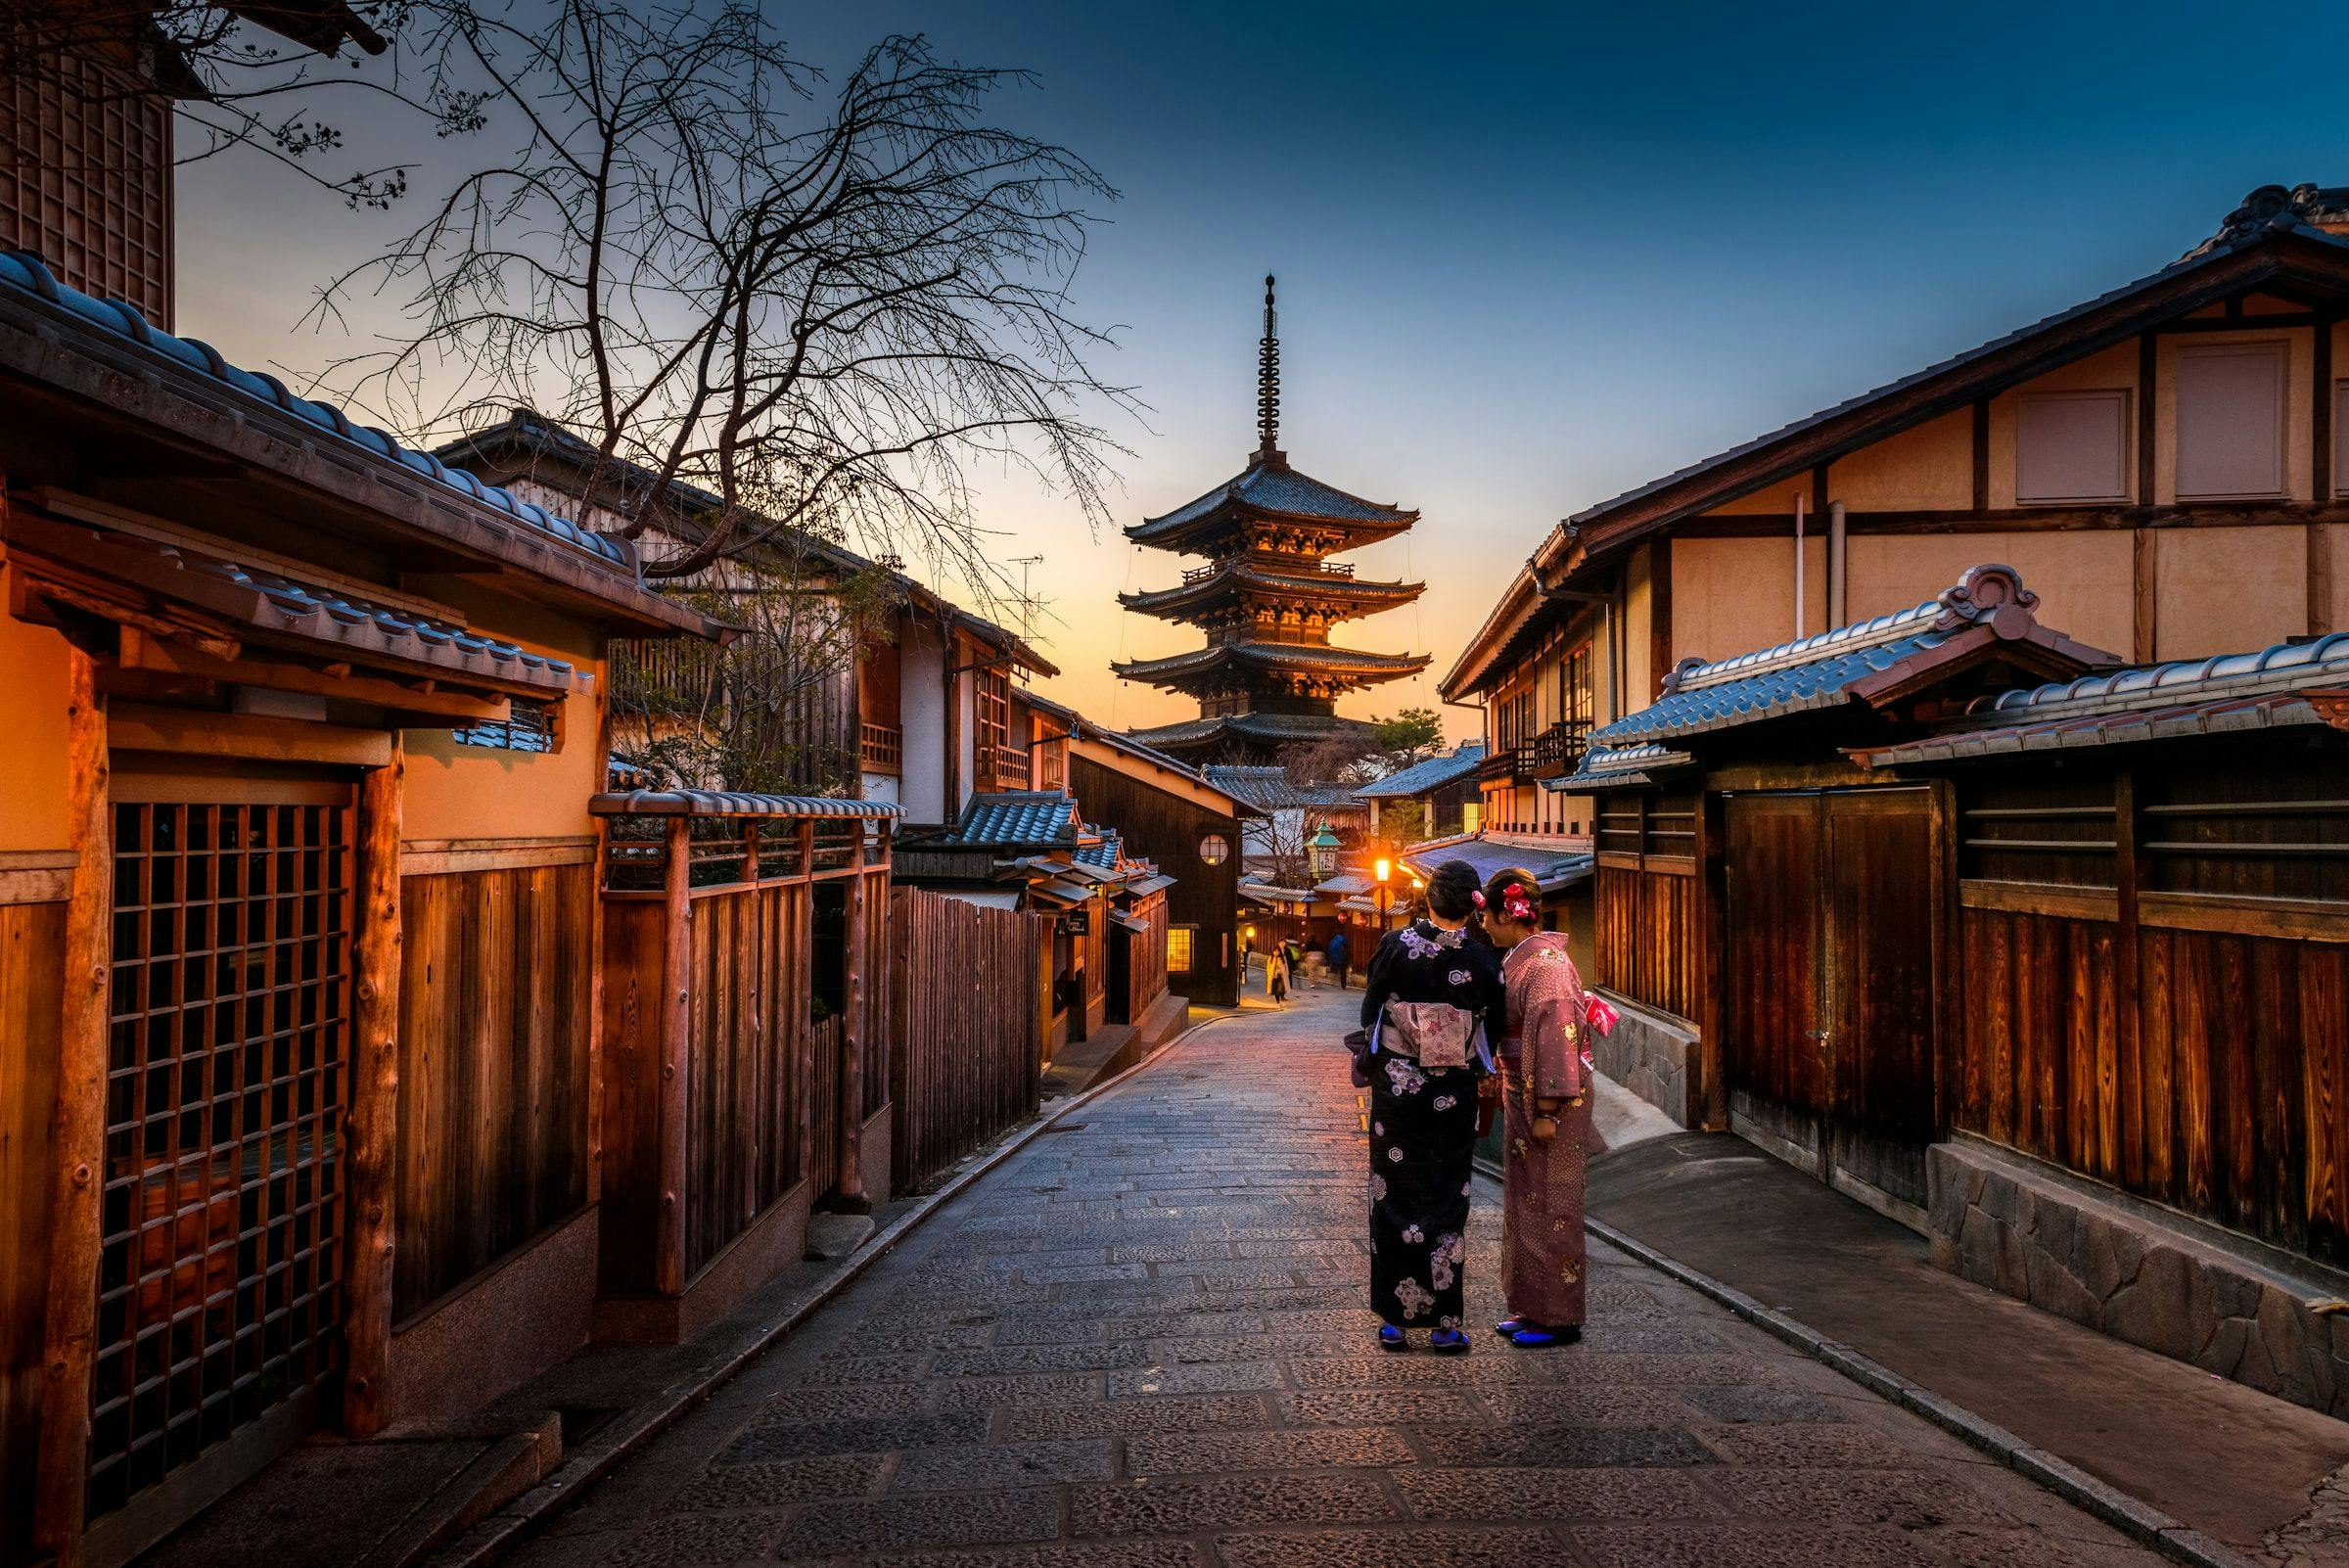 The Top 5 Best Budget Hotels in Kyoto